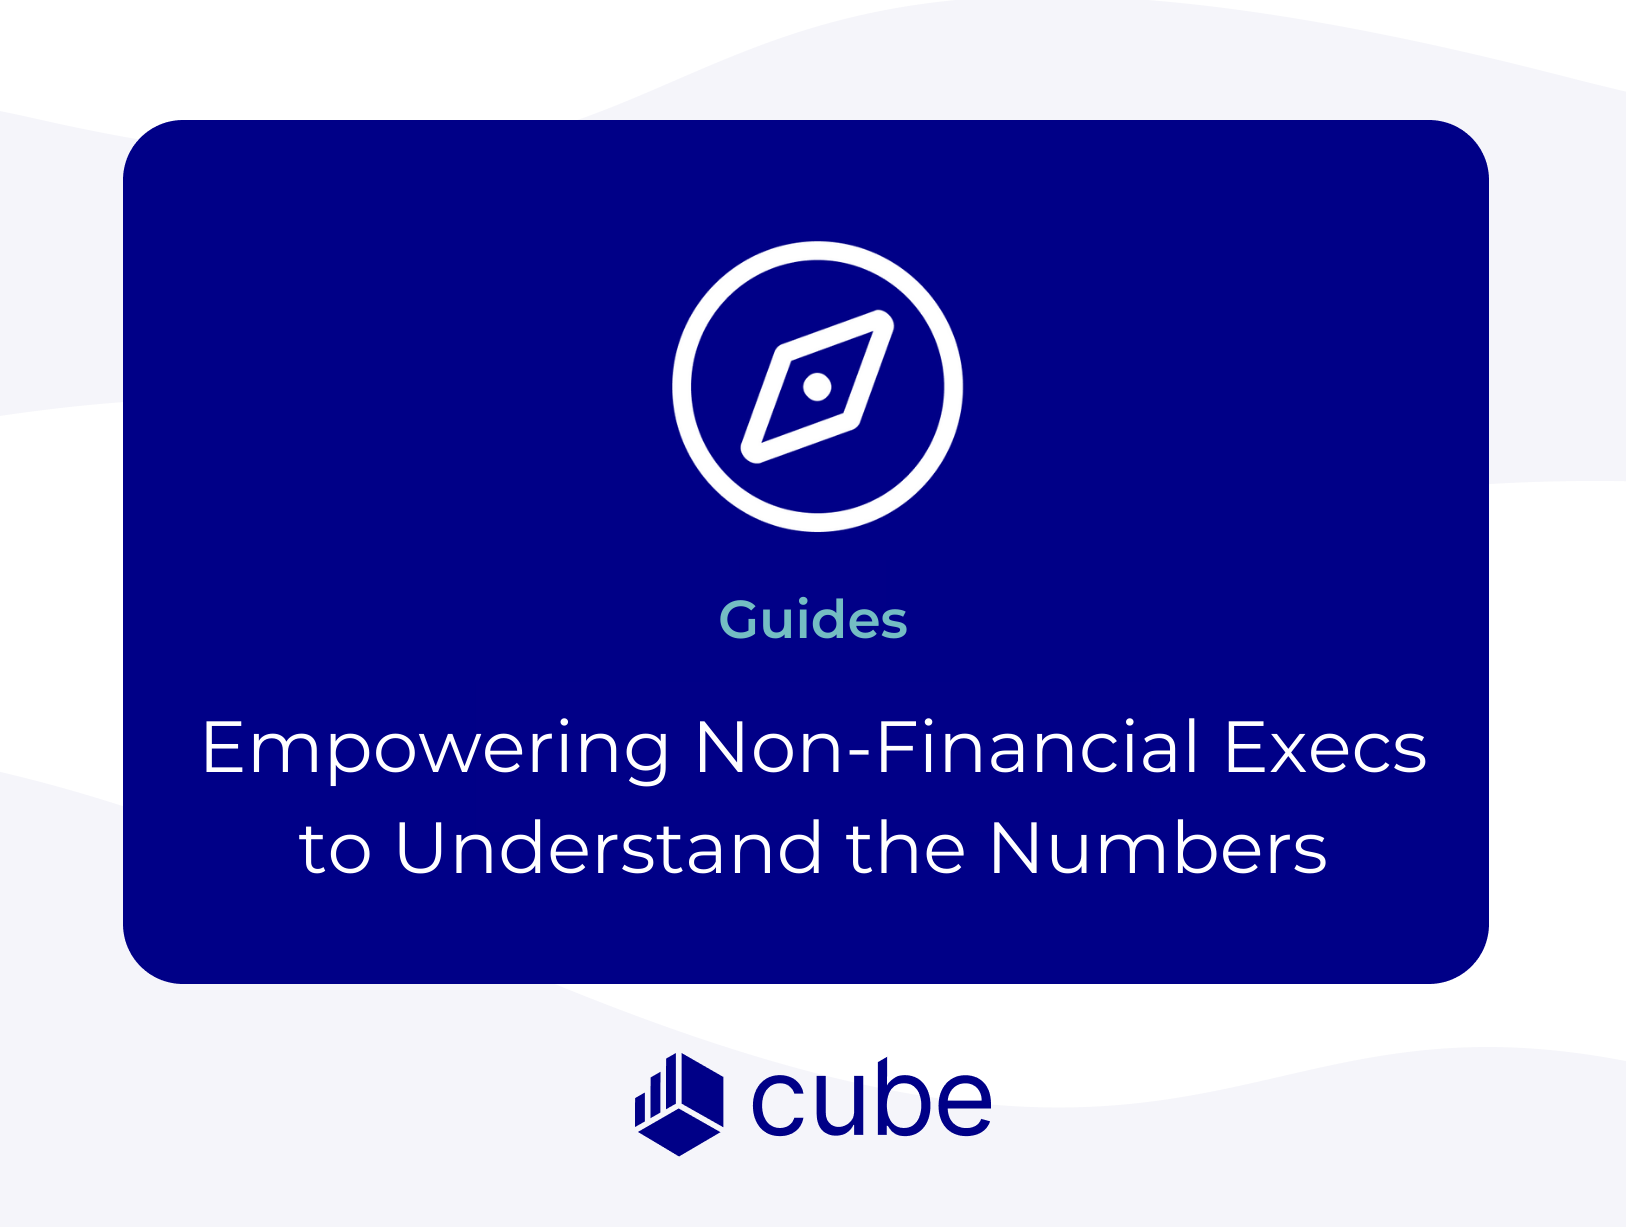 How to Empower Non-Financial Executives to Understand the Numbers